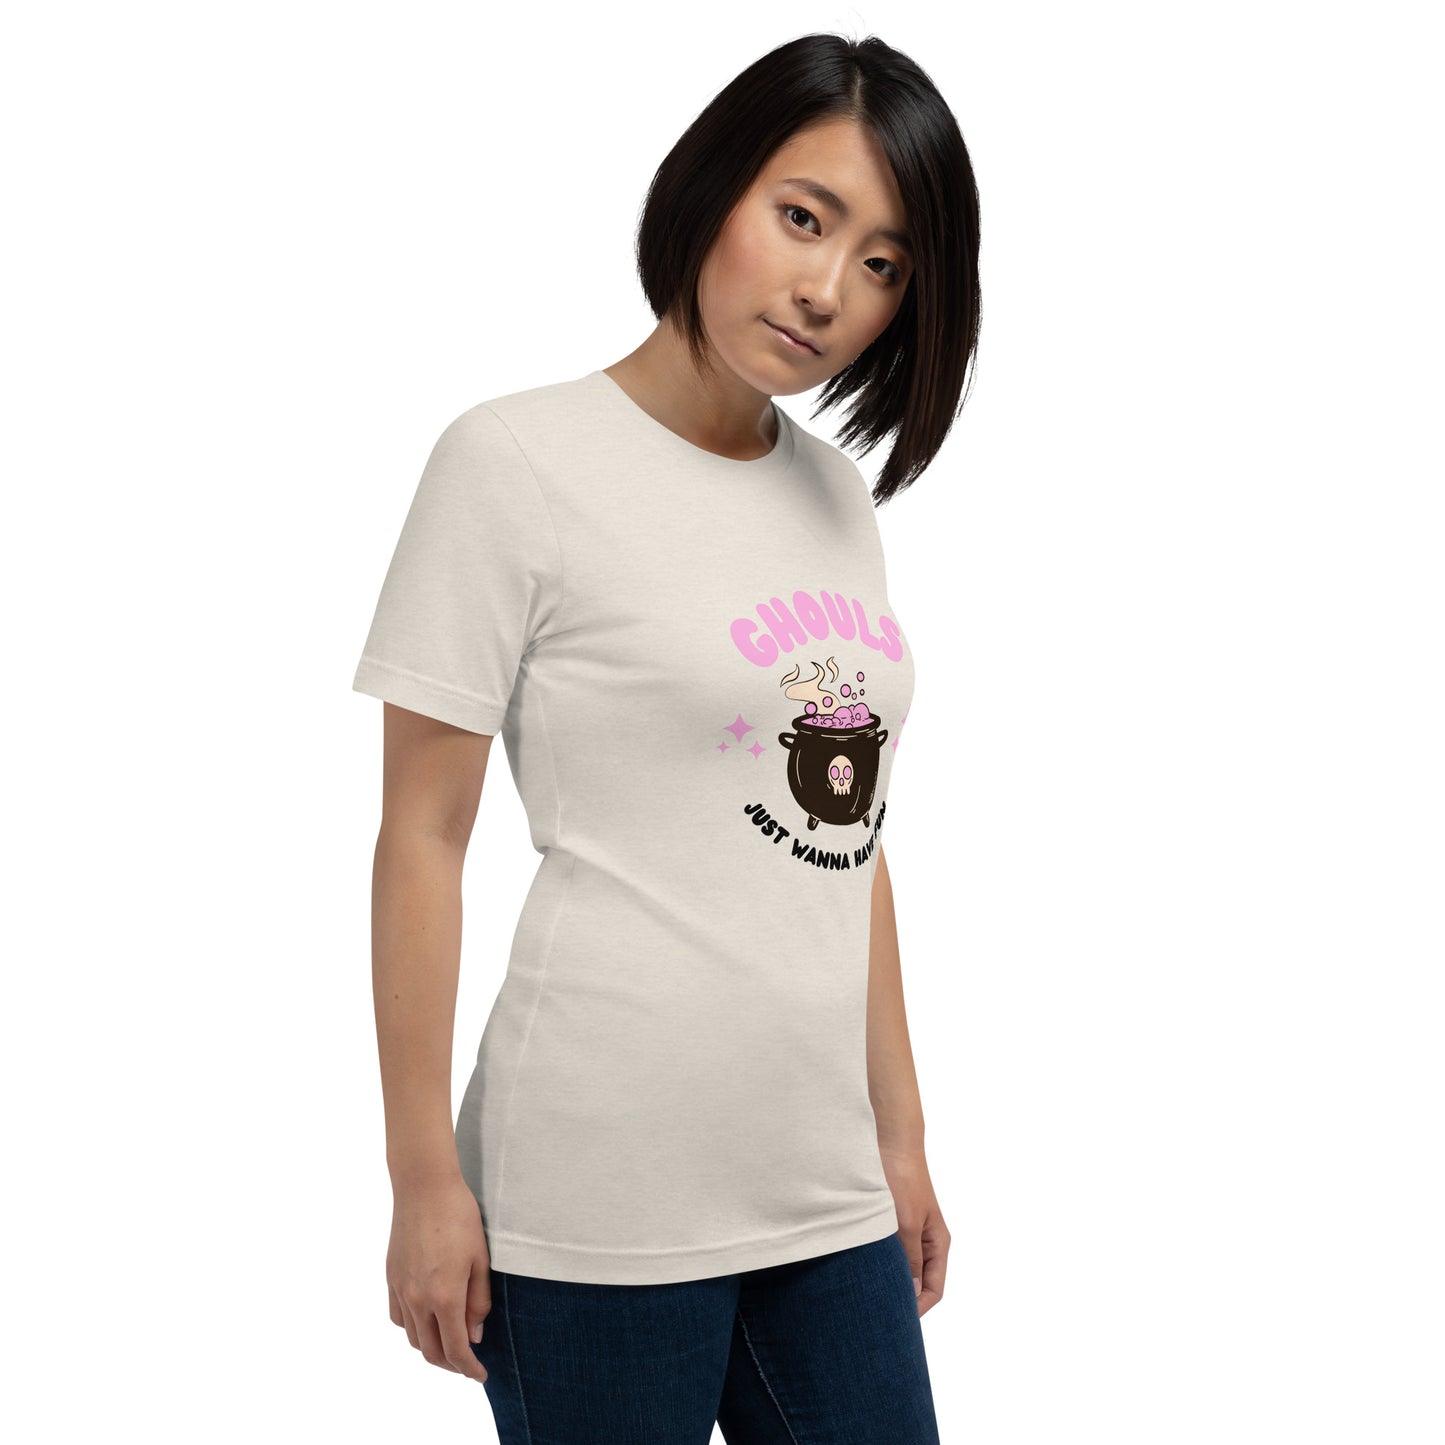 Ghouls Just Wanna Have Fun Unisex T-shirt